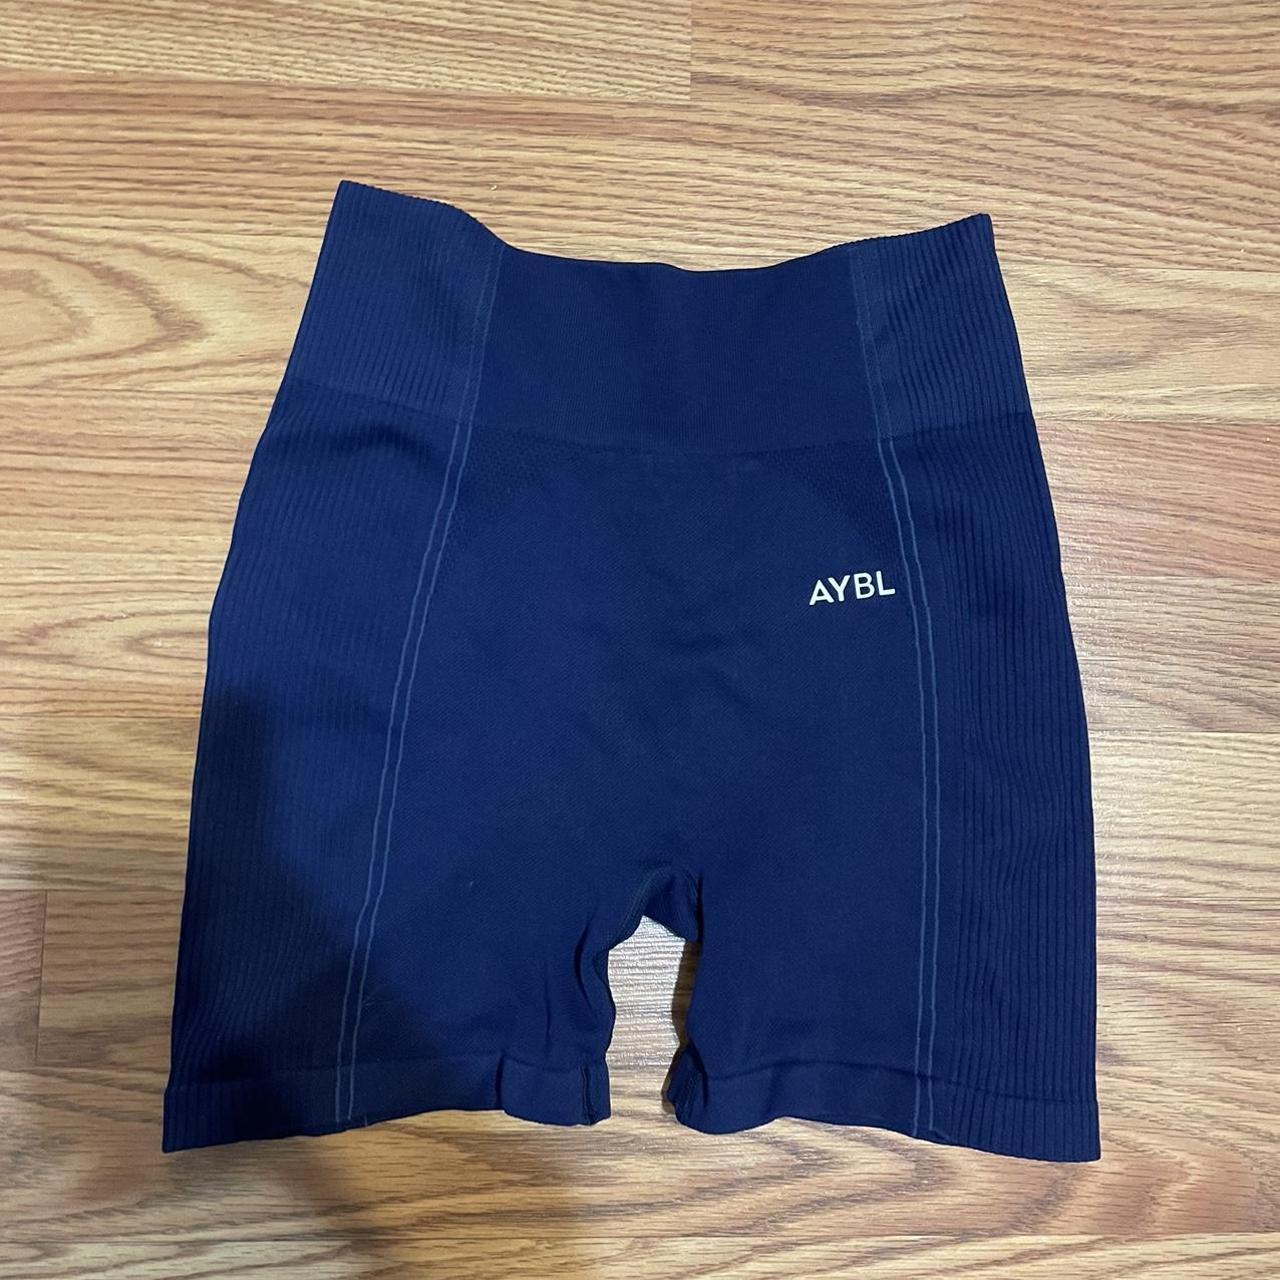 Fitted AYBL shorts, great condition, stretchy material - Depop